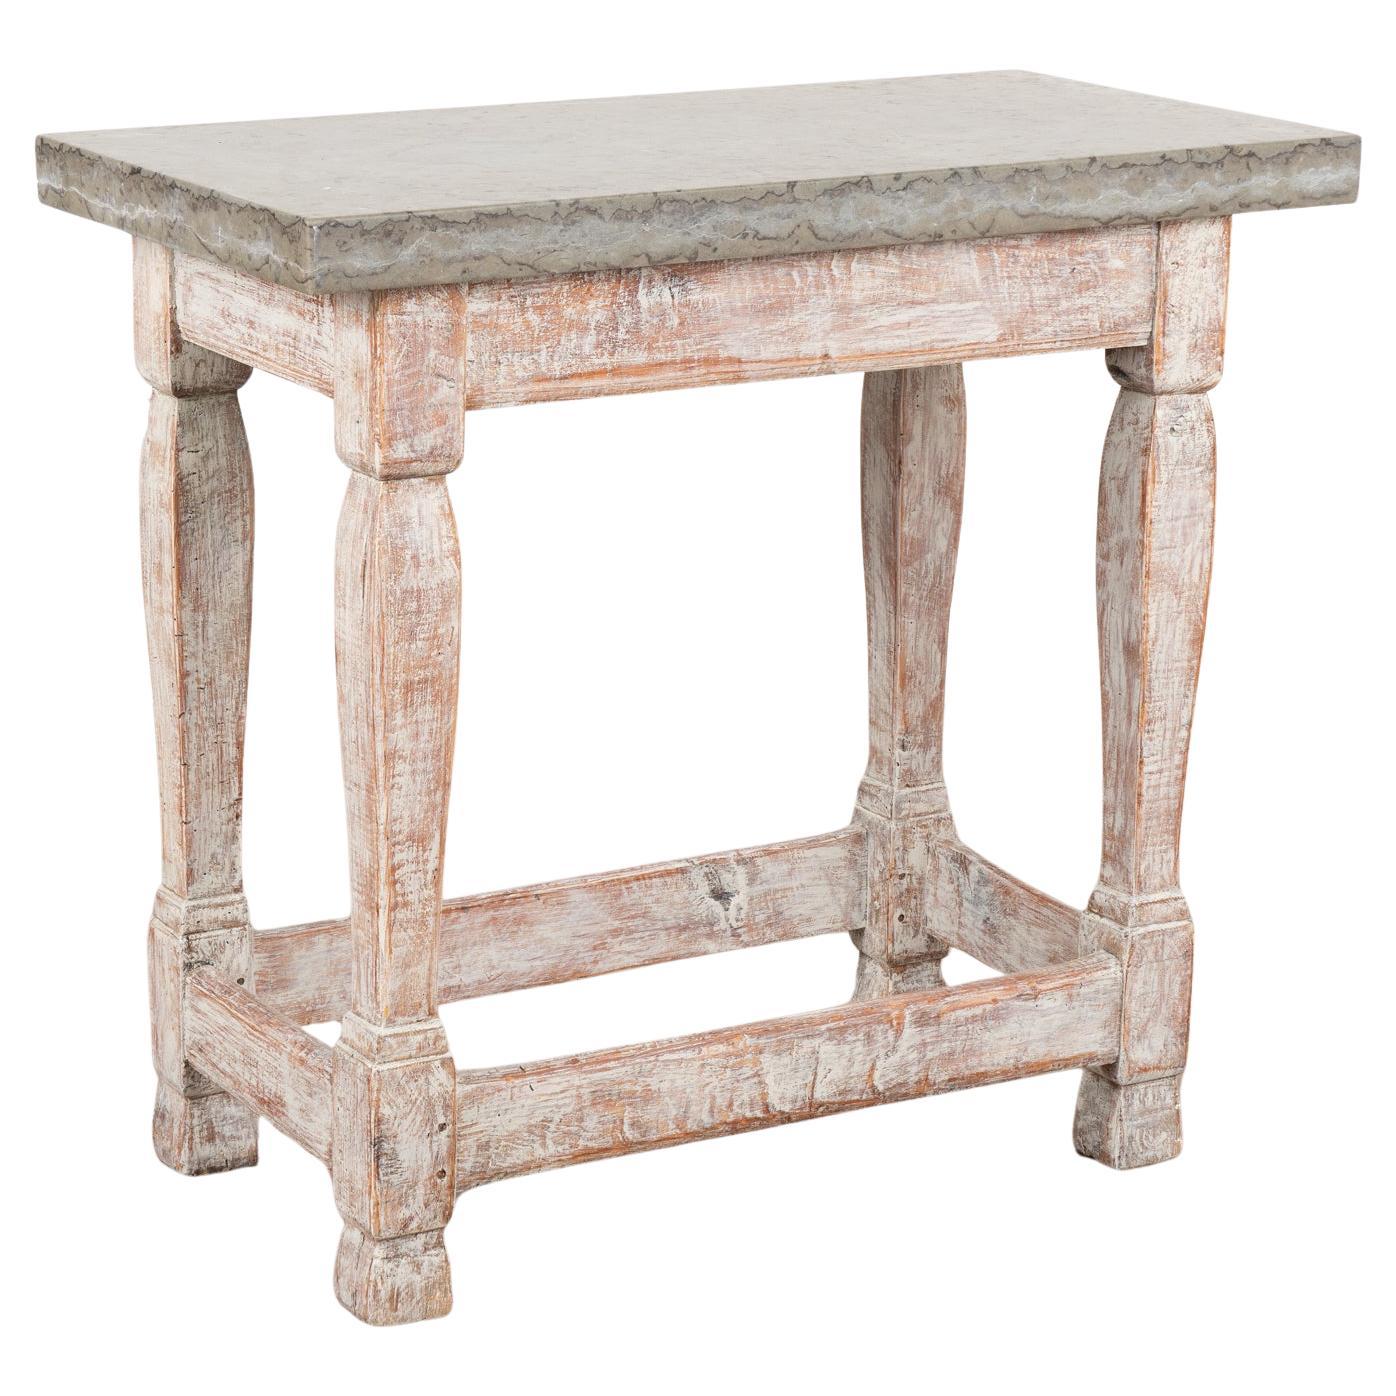 Stone Top Side Table Small Console Table, Sweden circa 1800-40 For Sale